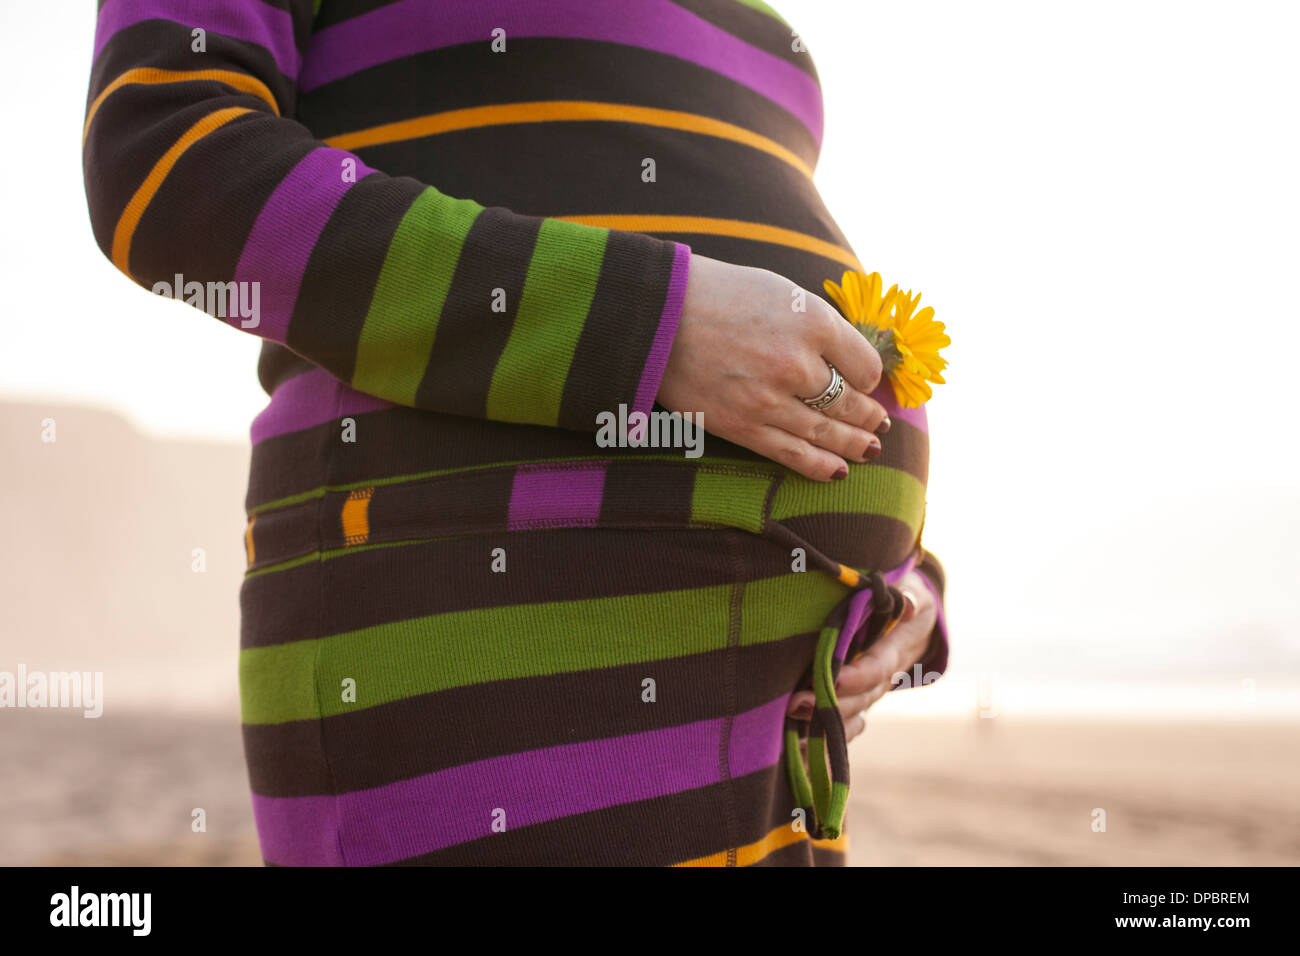 Pregnant woman holding yellow flower in hand during sunset. Stock Photo